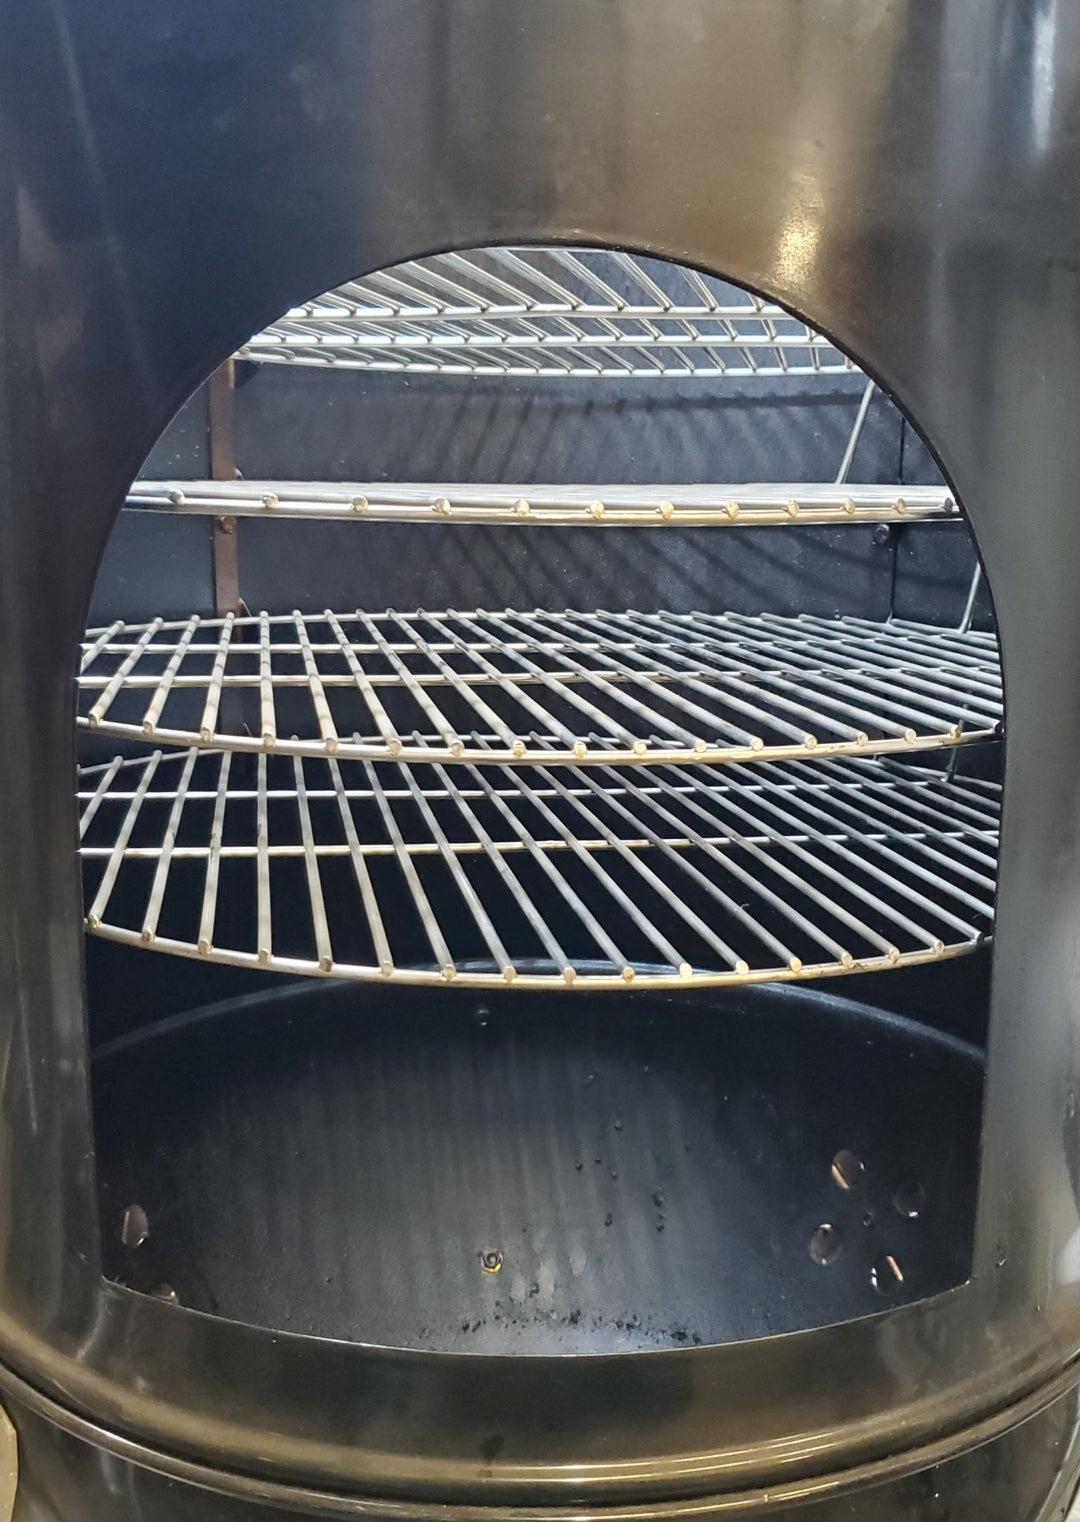 Adjustable Grate System For 22.5" WSM (Add up to 5 food grates) - Hunsaker Vortex Smokers